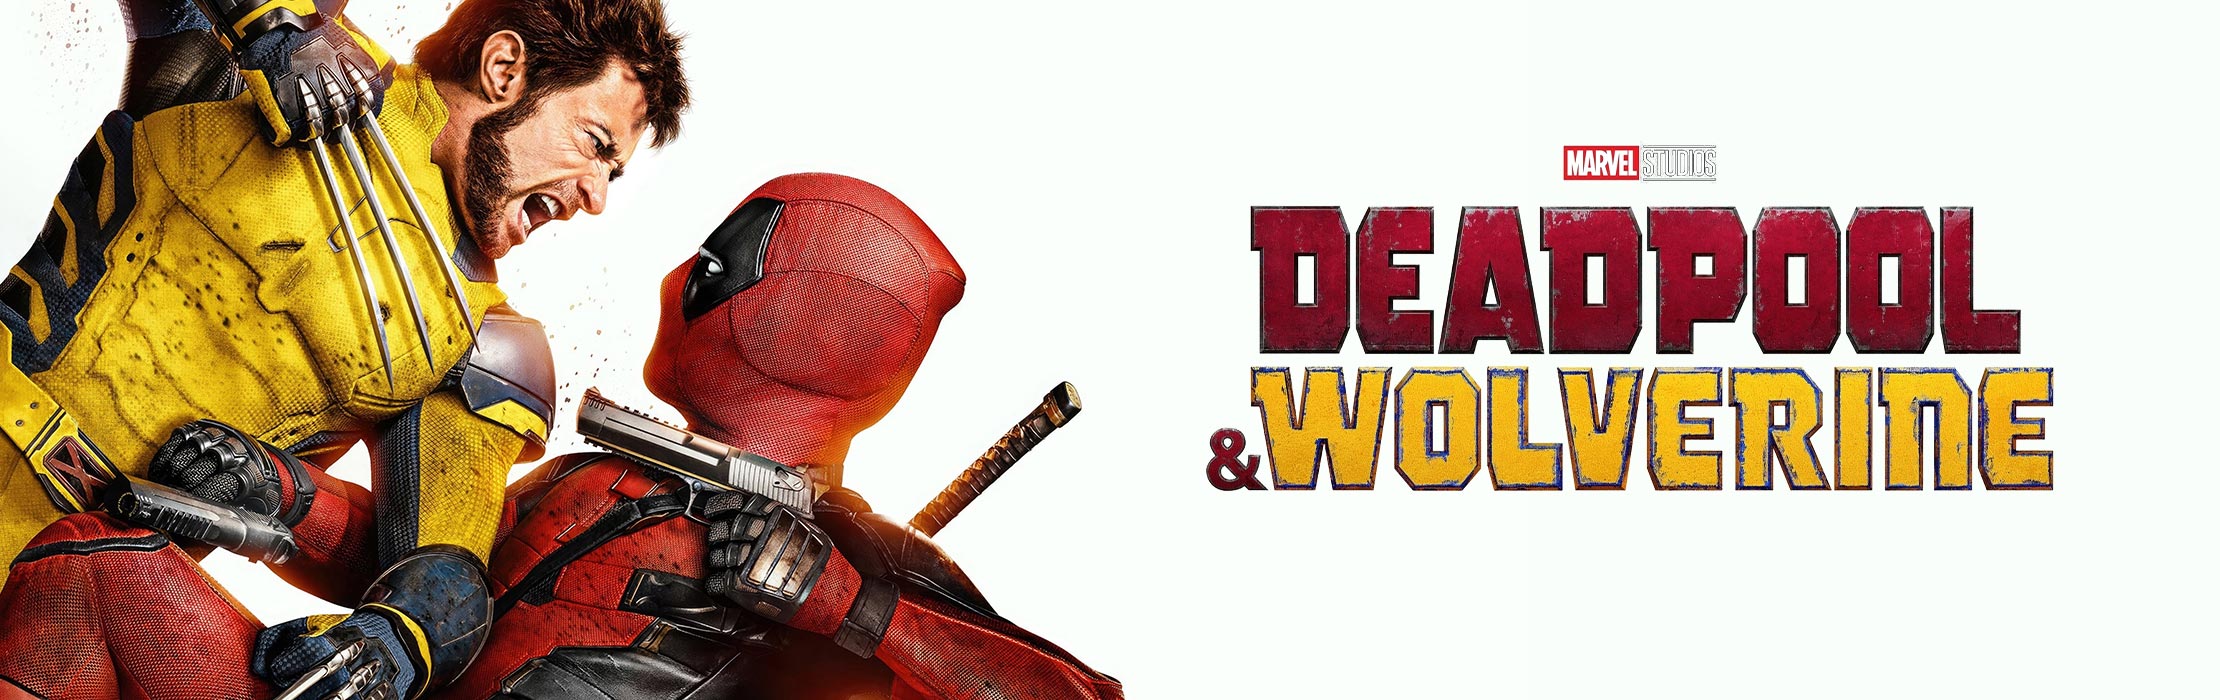 /film/Deadpool-and-Wolverine/accessibility